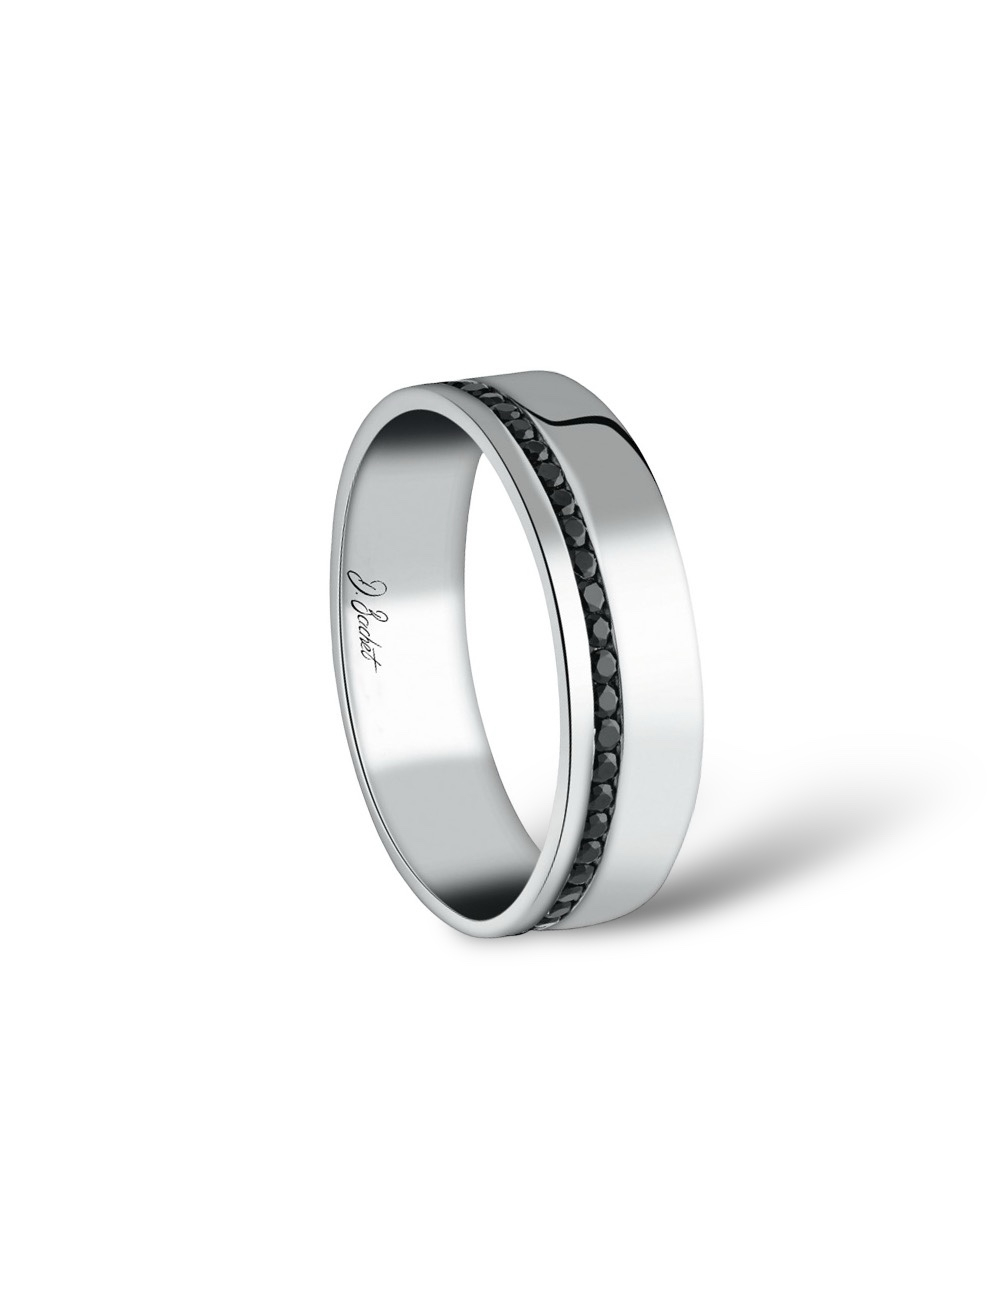 Modern men's wedding band, black diamonds, 6 mm in width, highlighted with platinum.